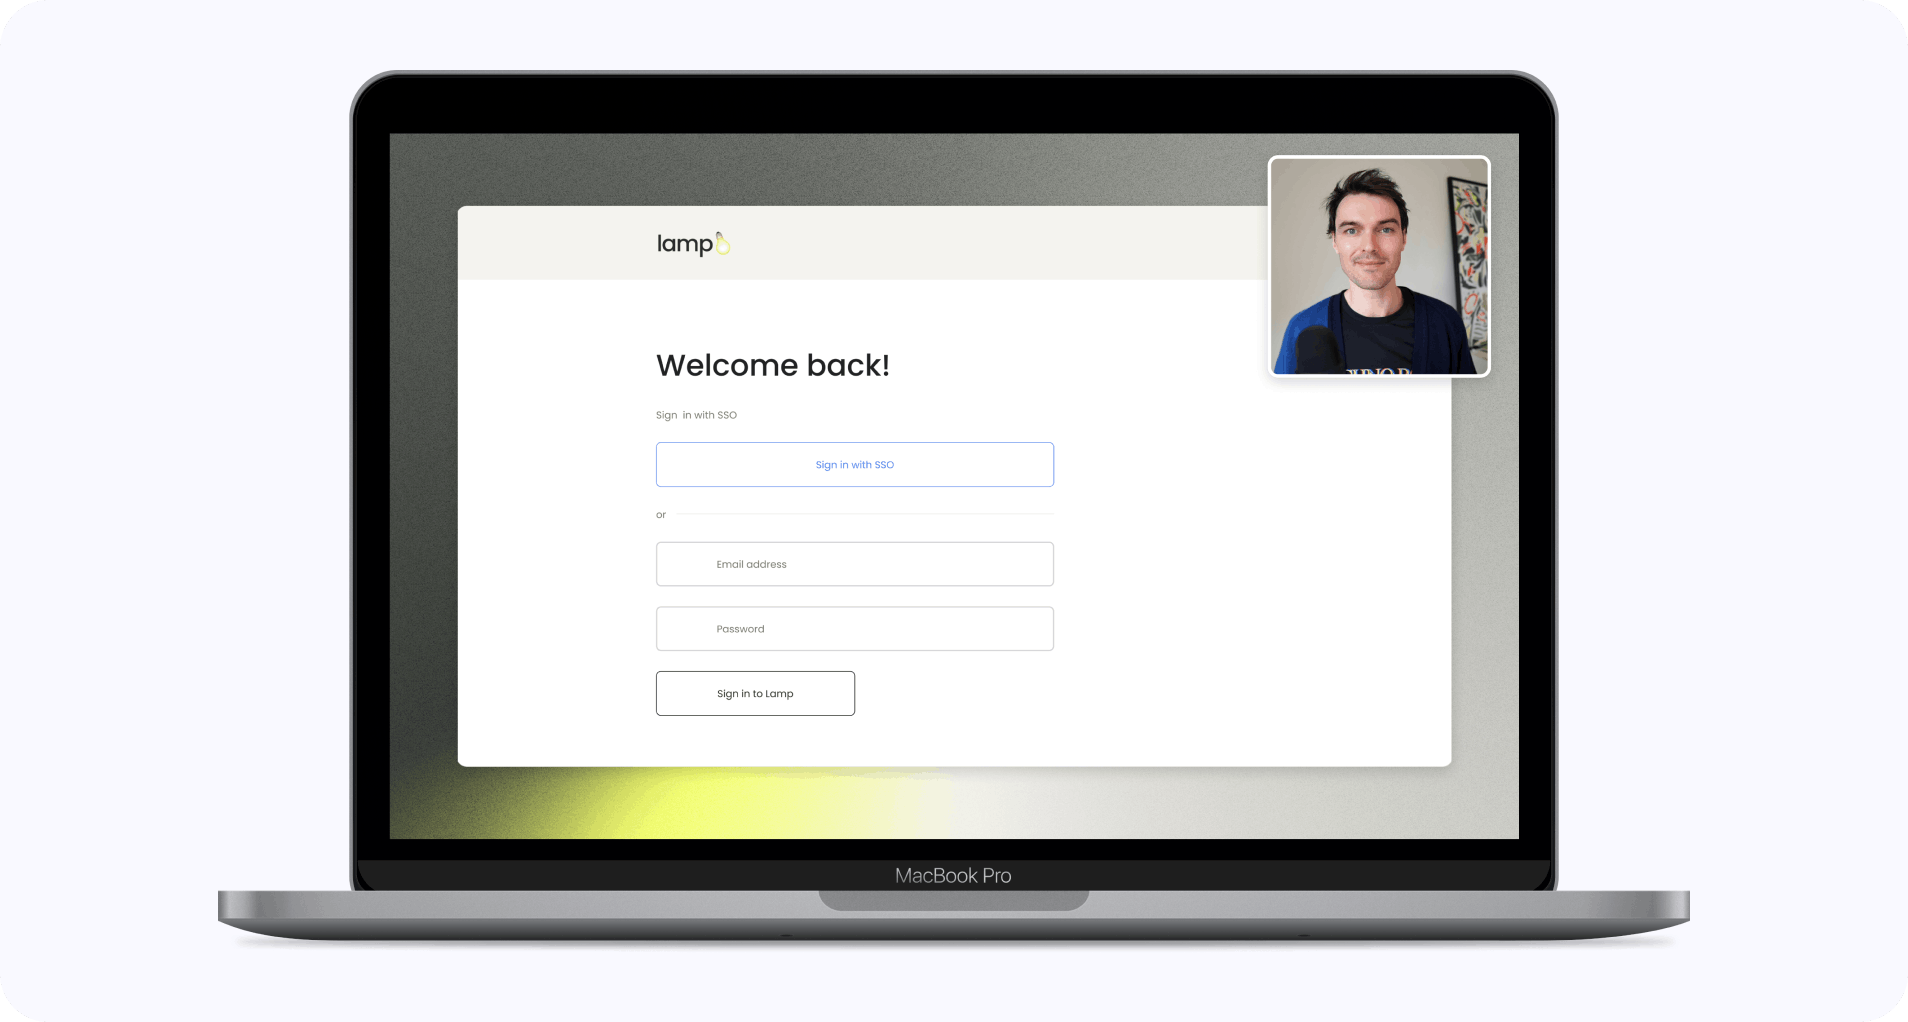 Record customer onboarding videos from your laptop.